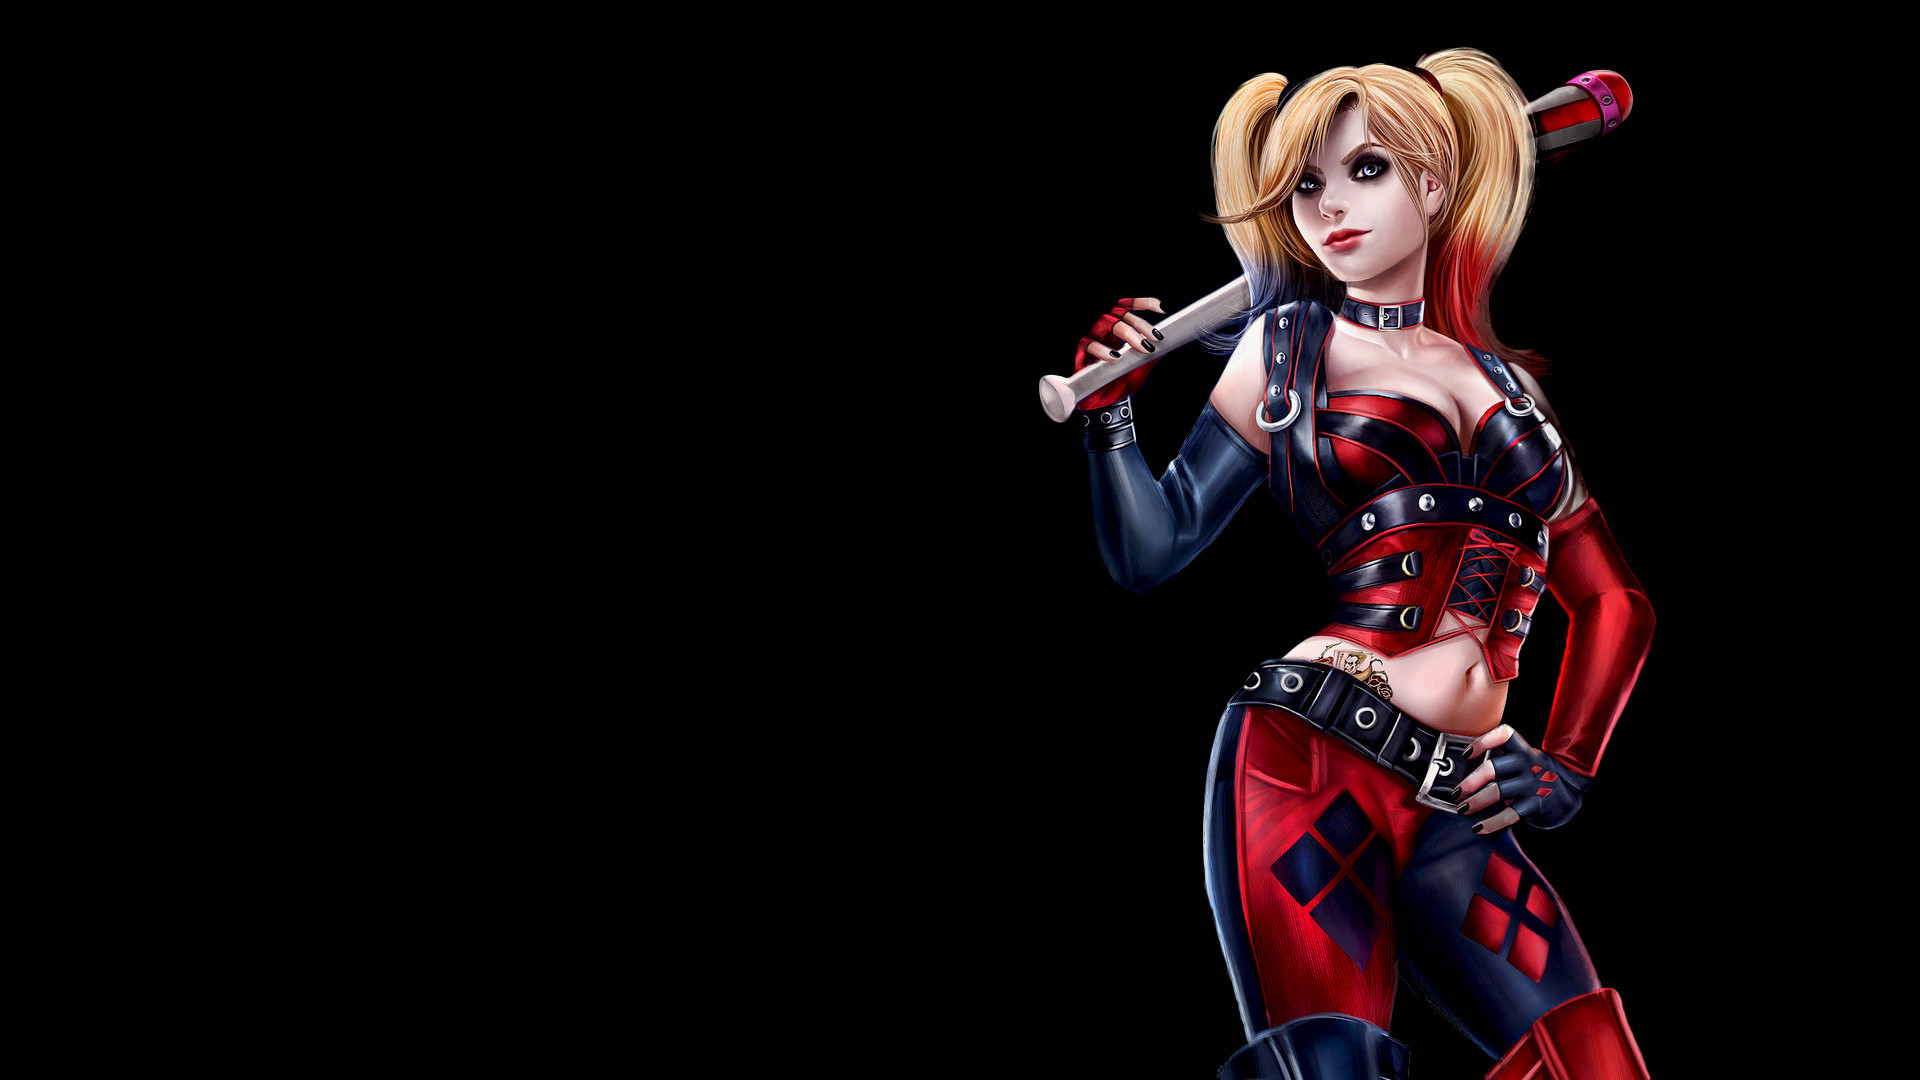 1920x1080 Image Gallery: harley quinn background